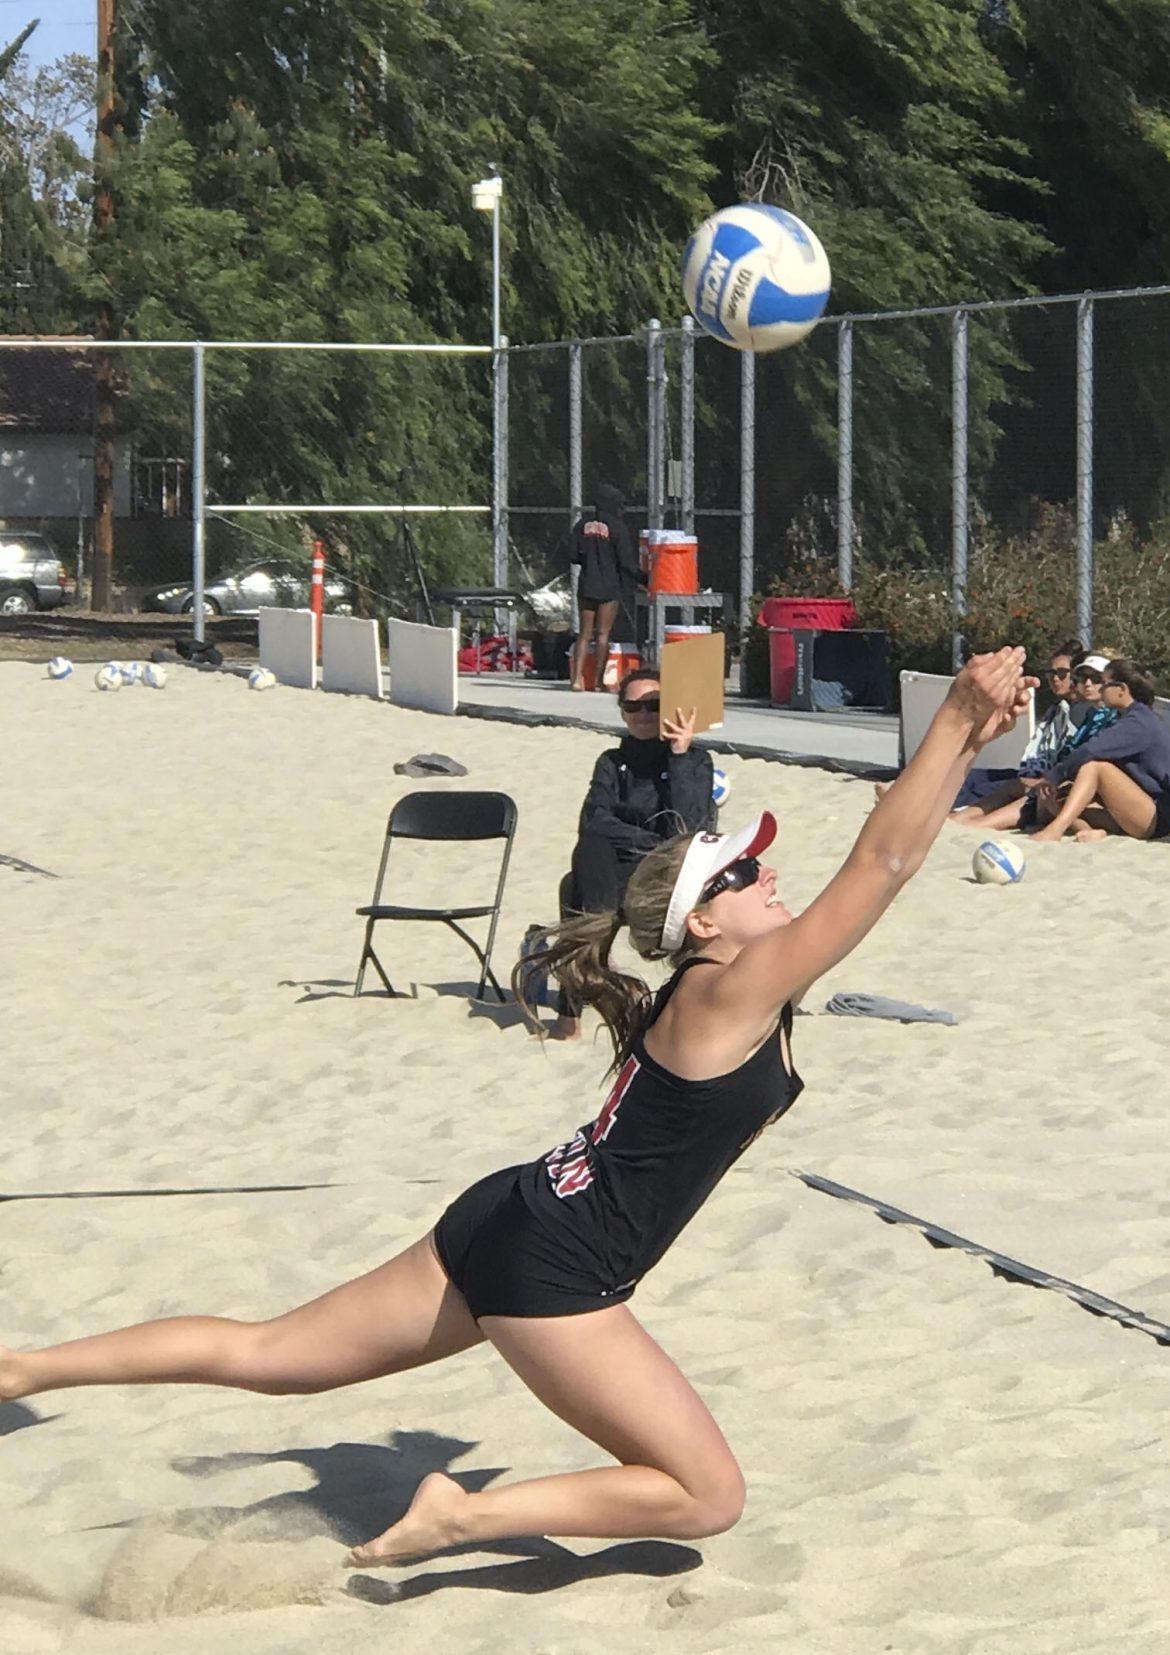 woman hits ball up into the air during sand volleyball